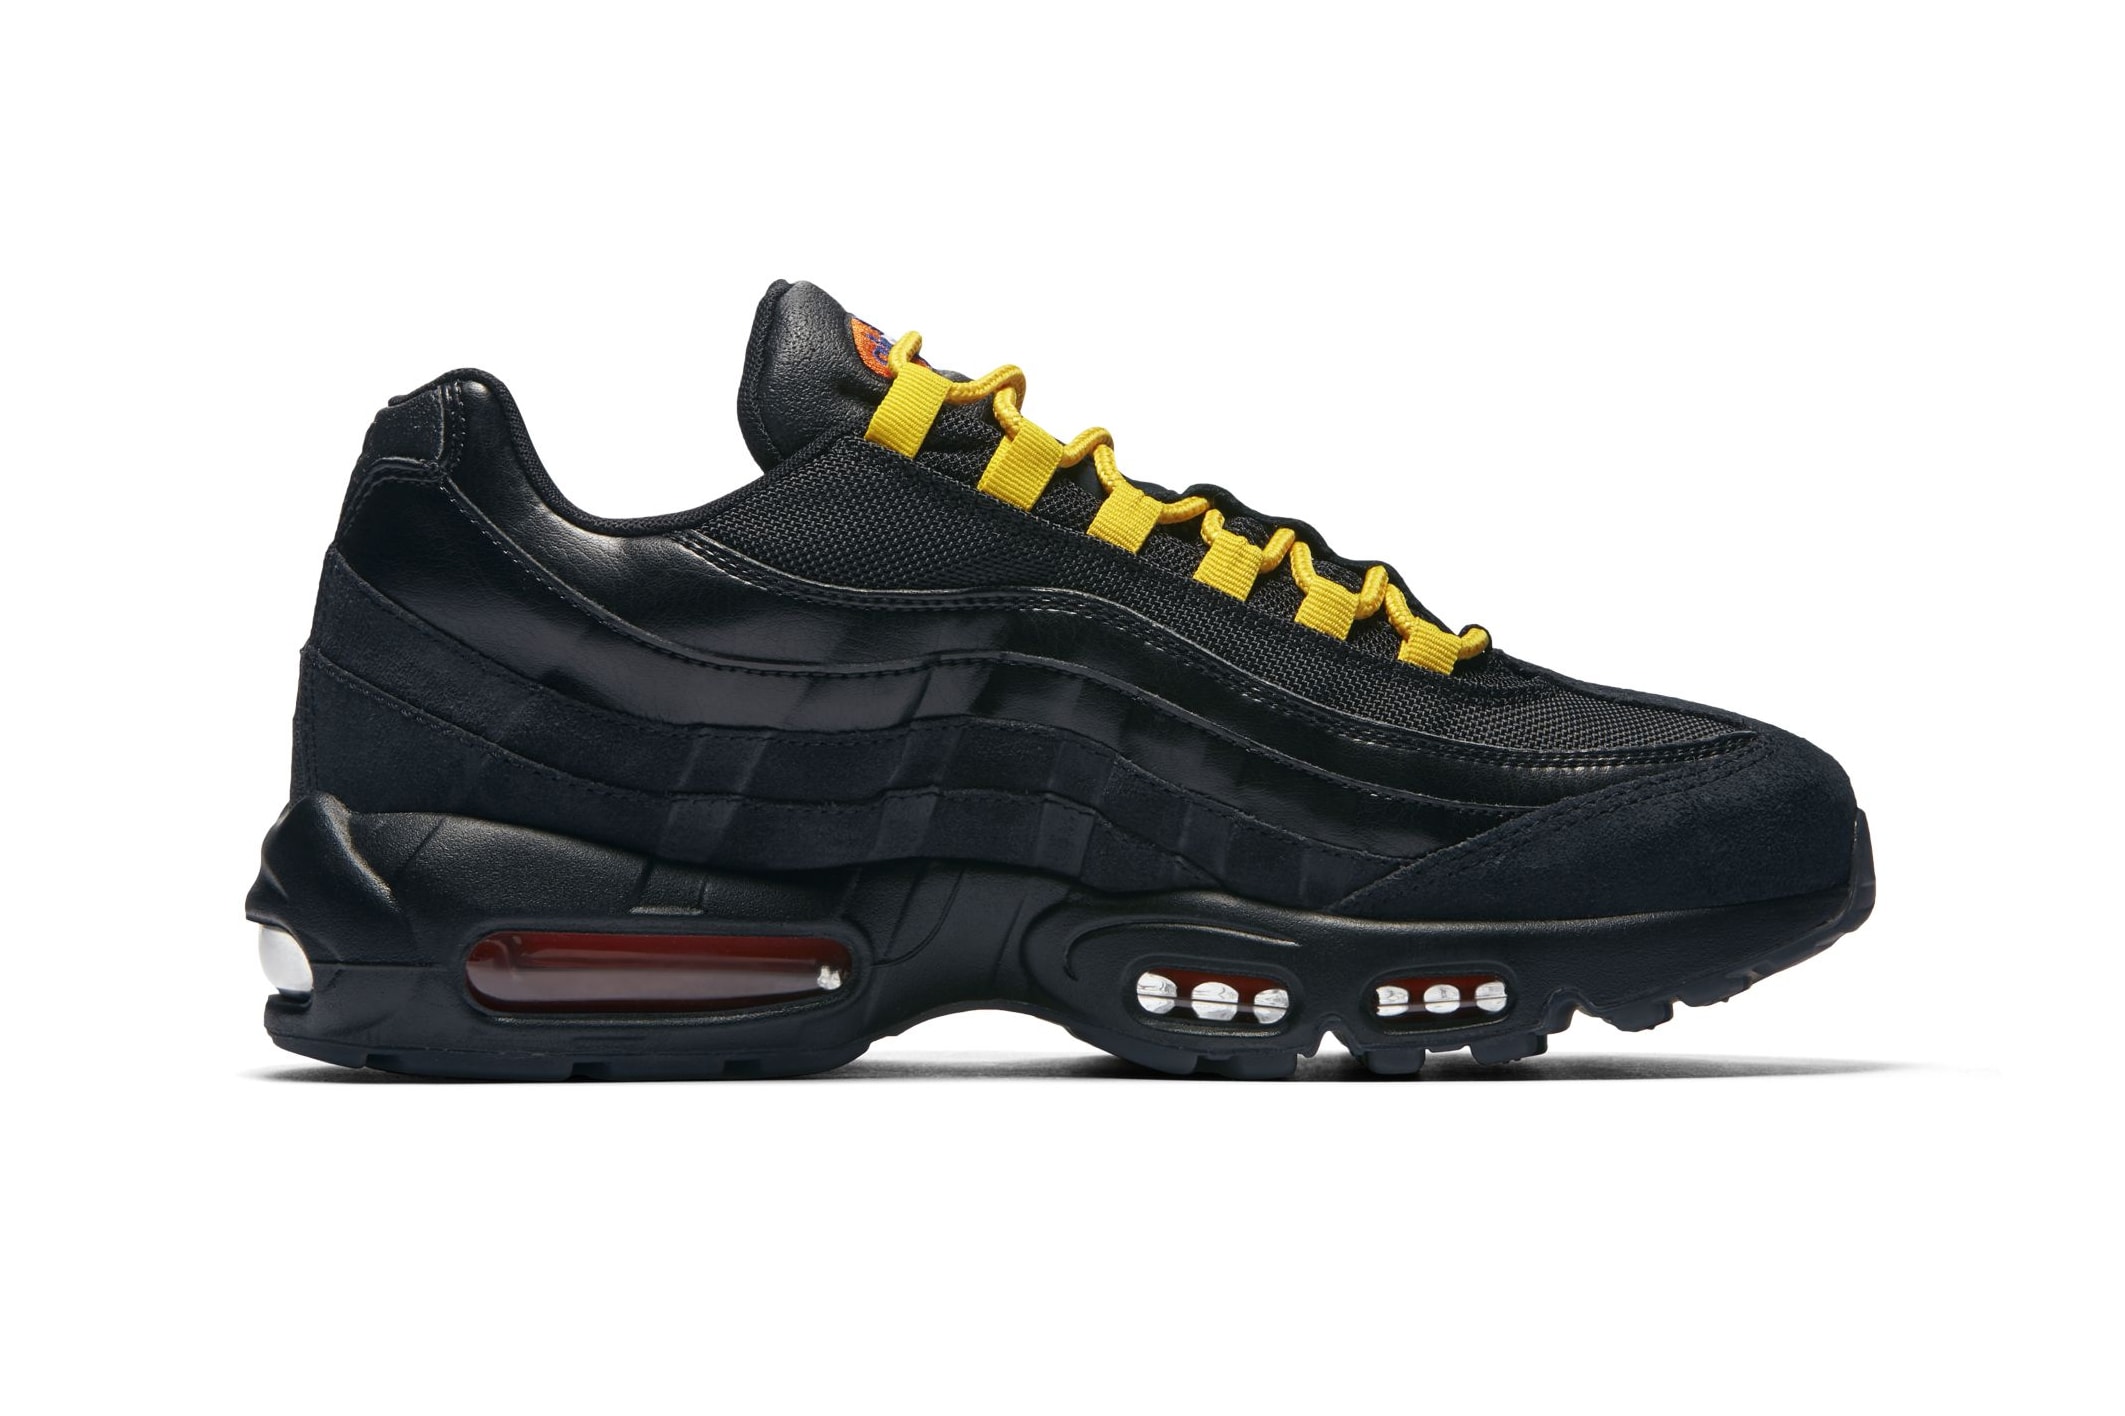 Nike Air Max 95 Premium "LA lakers/NY Knicks" los angeles new york NBA team colors sneaker colorway mismatch release date info